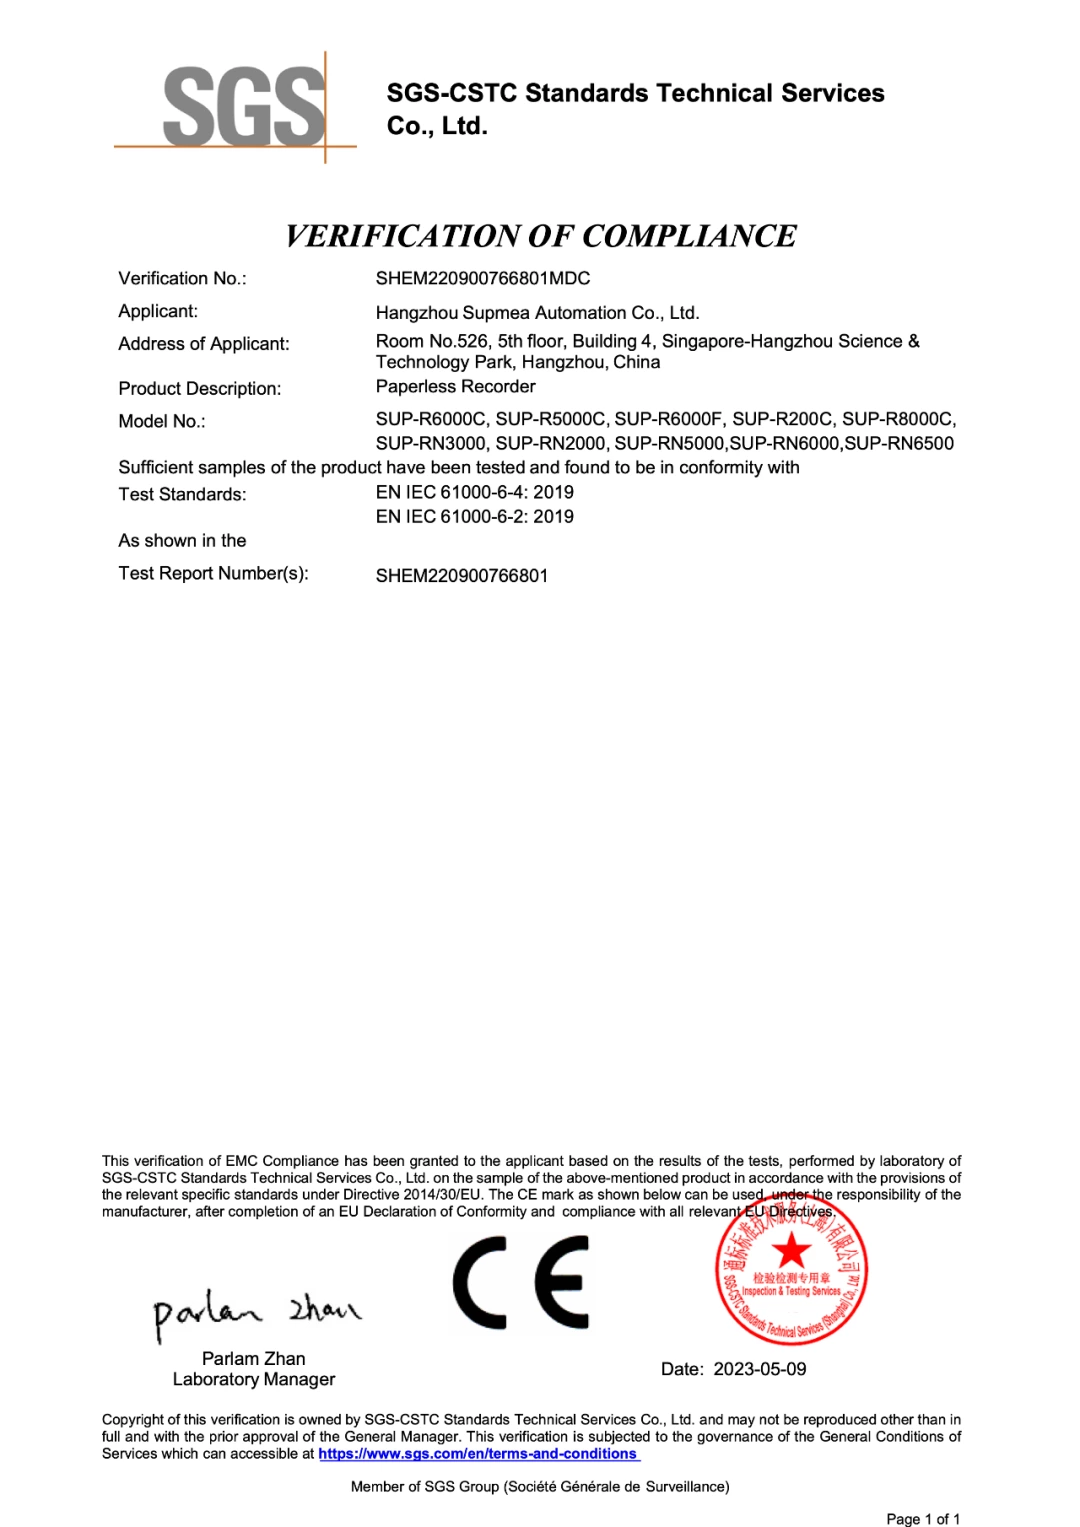 Global Authority SGS Certifies Supmea's Paperless Recorder with CE Certification